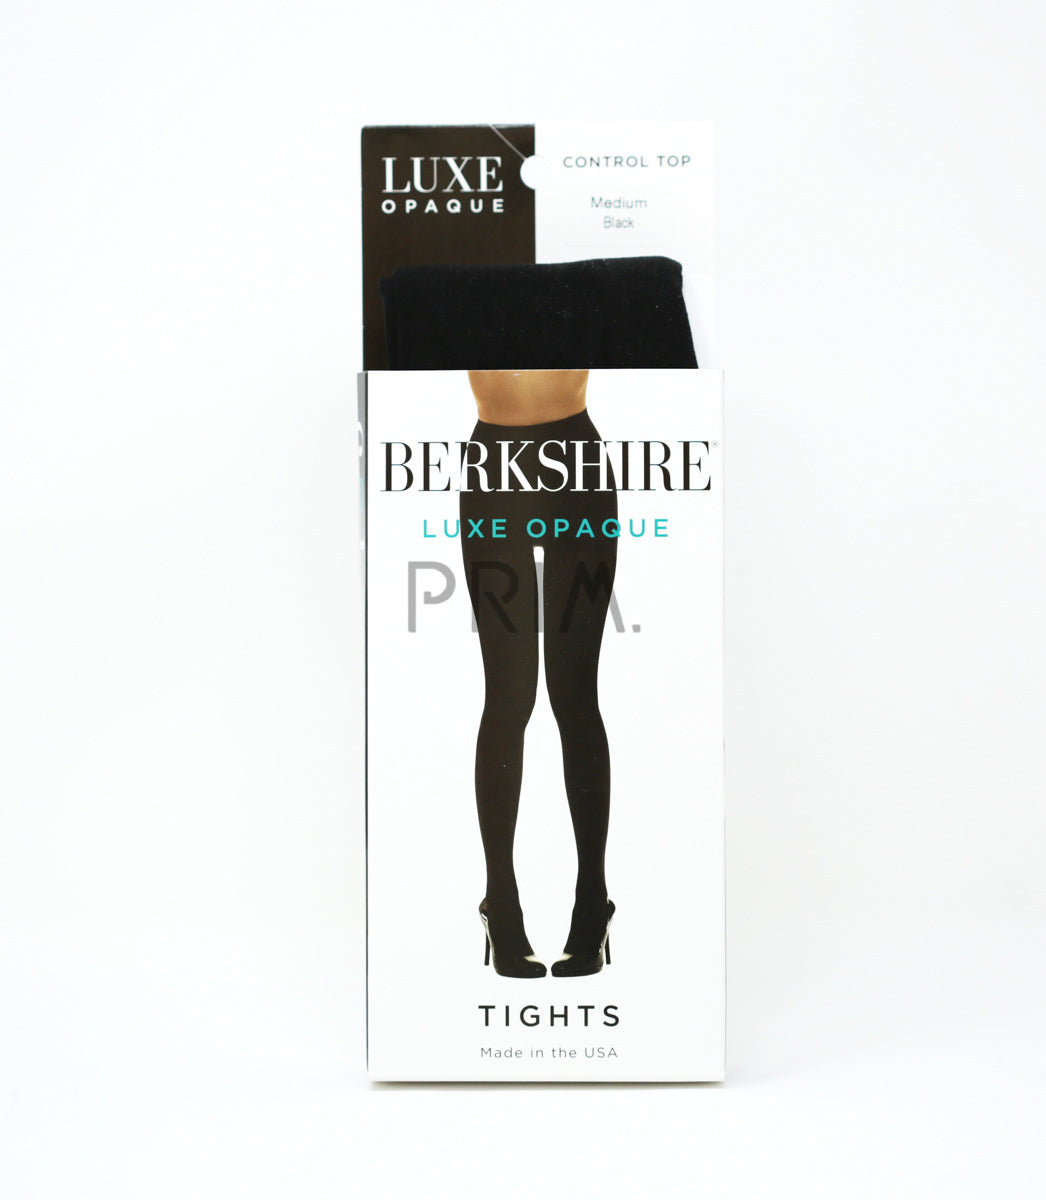 BERKSHIRE LUX OPAQUE TIGHTS